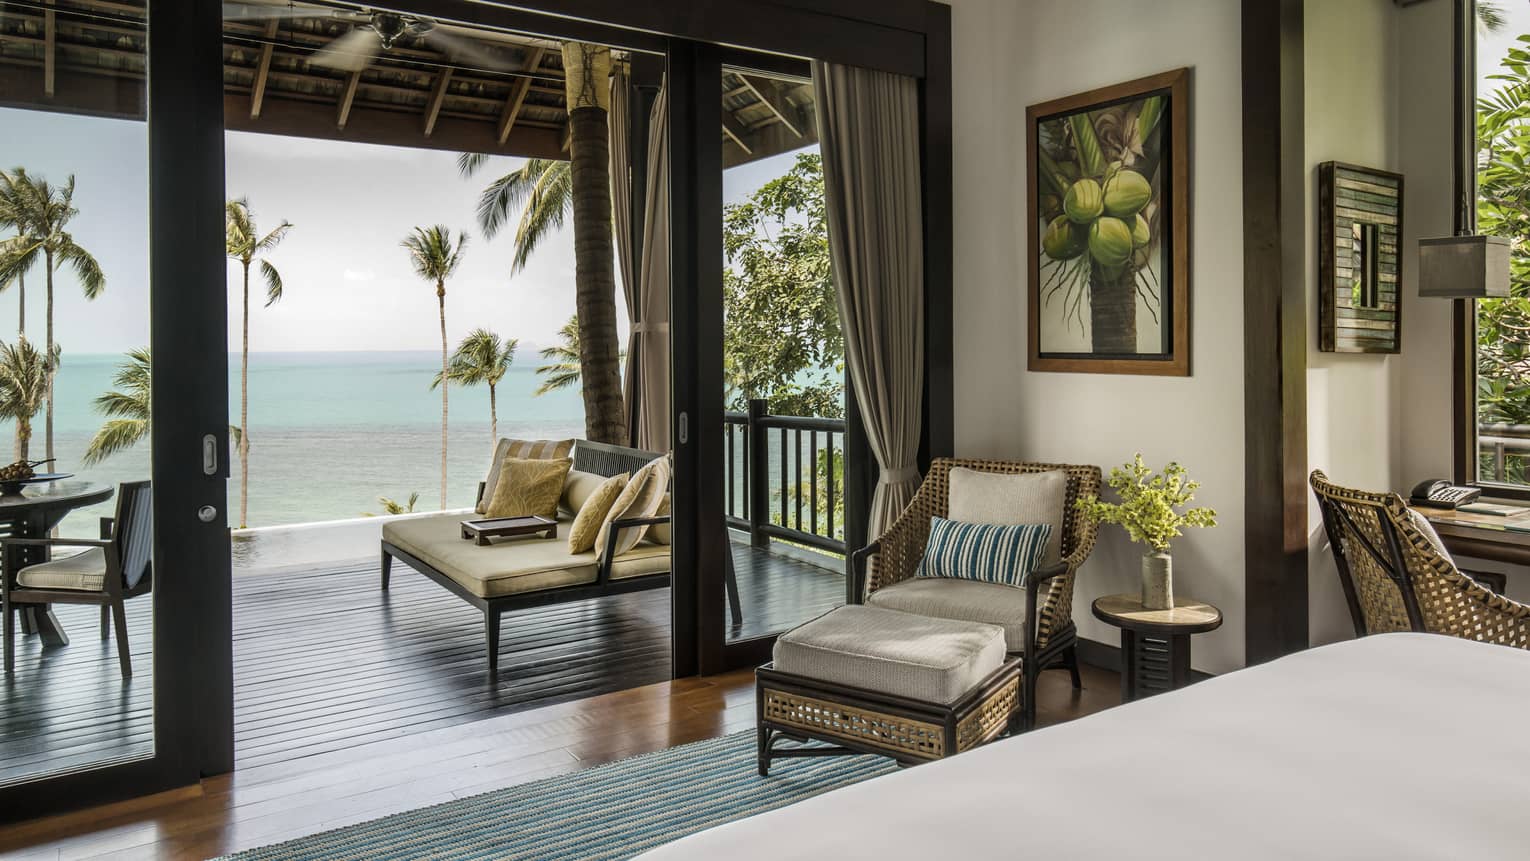 Villa bedroom with queen bed, rattan furniture and private beach access 